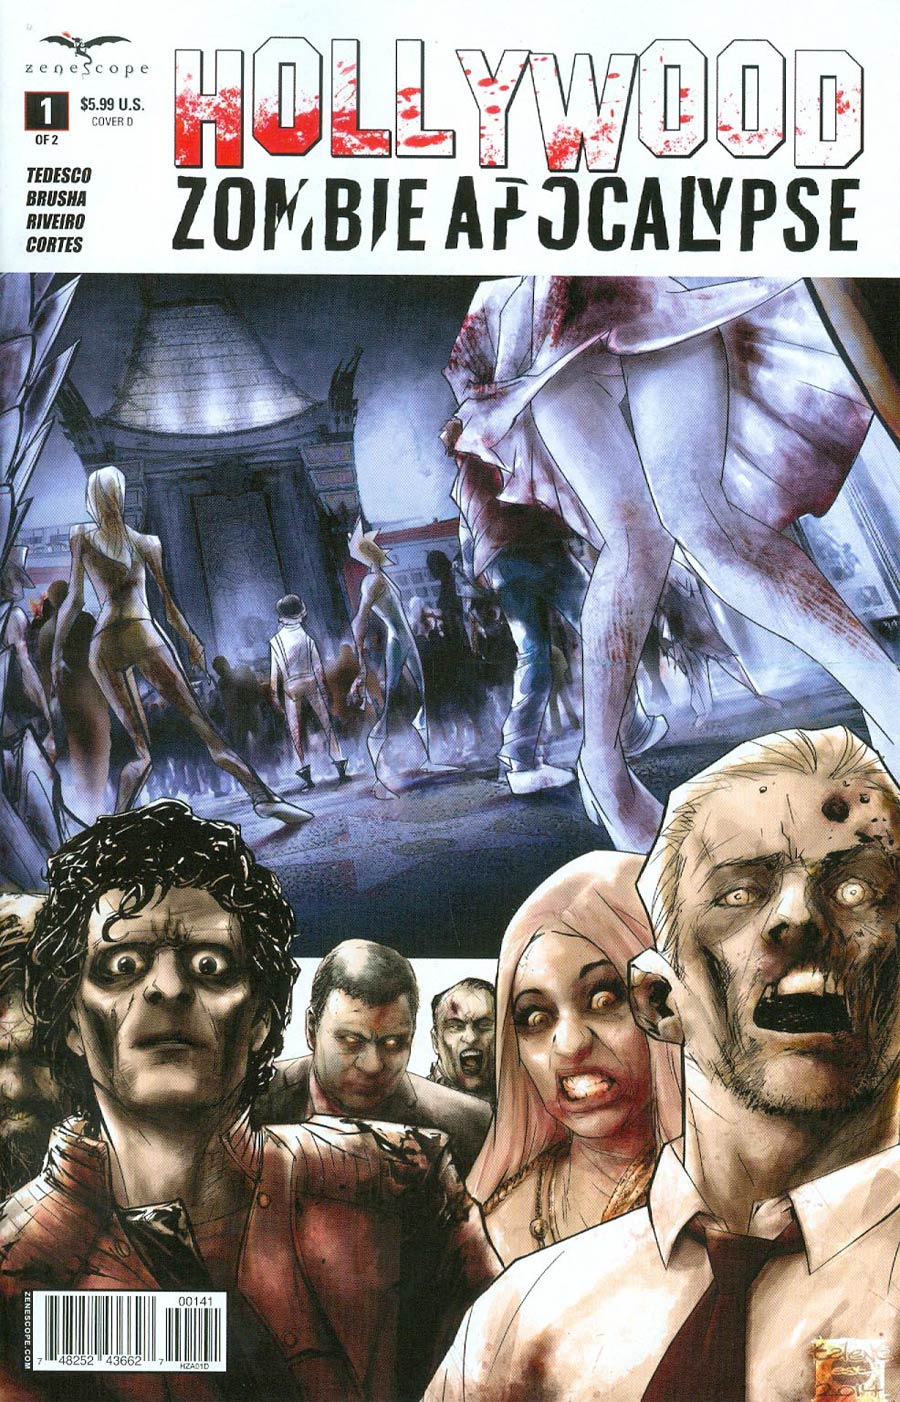 Hollywood Zombie Apocalypse #1 Cover D Talent Caldwell